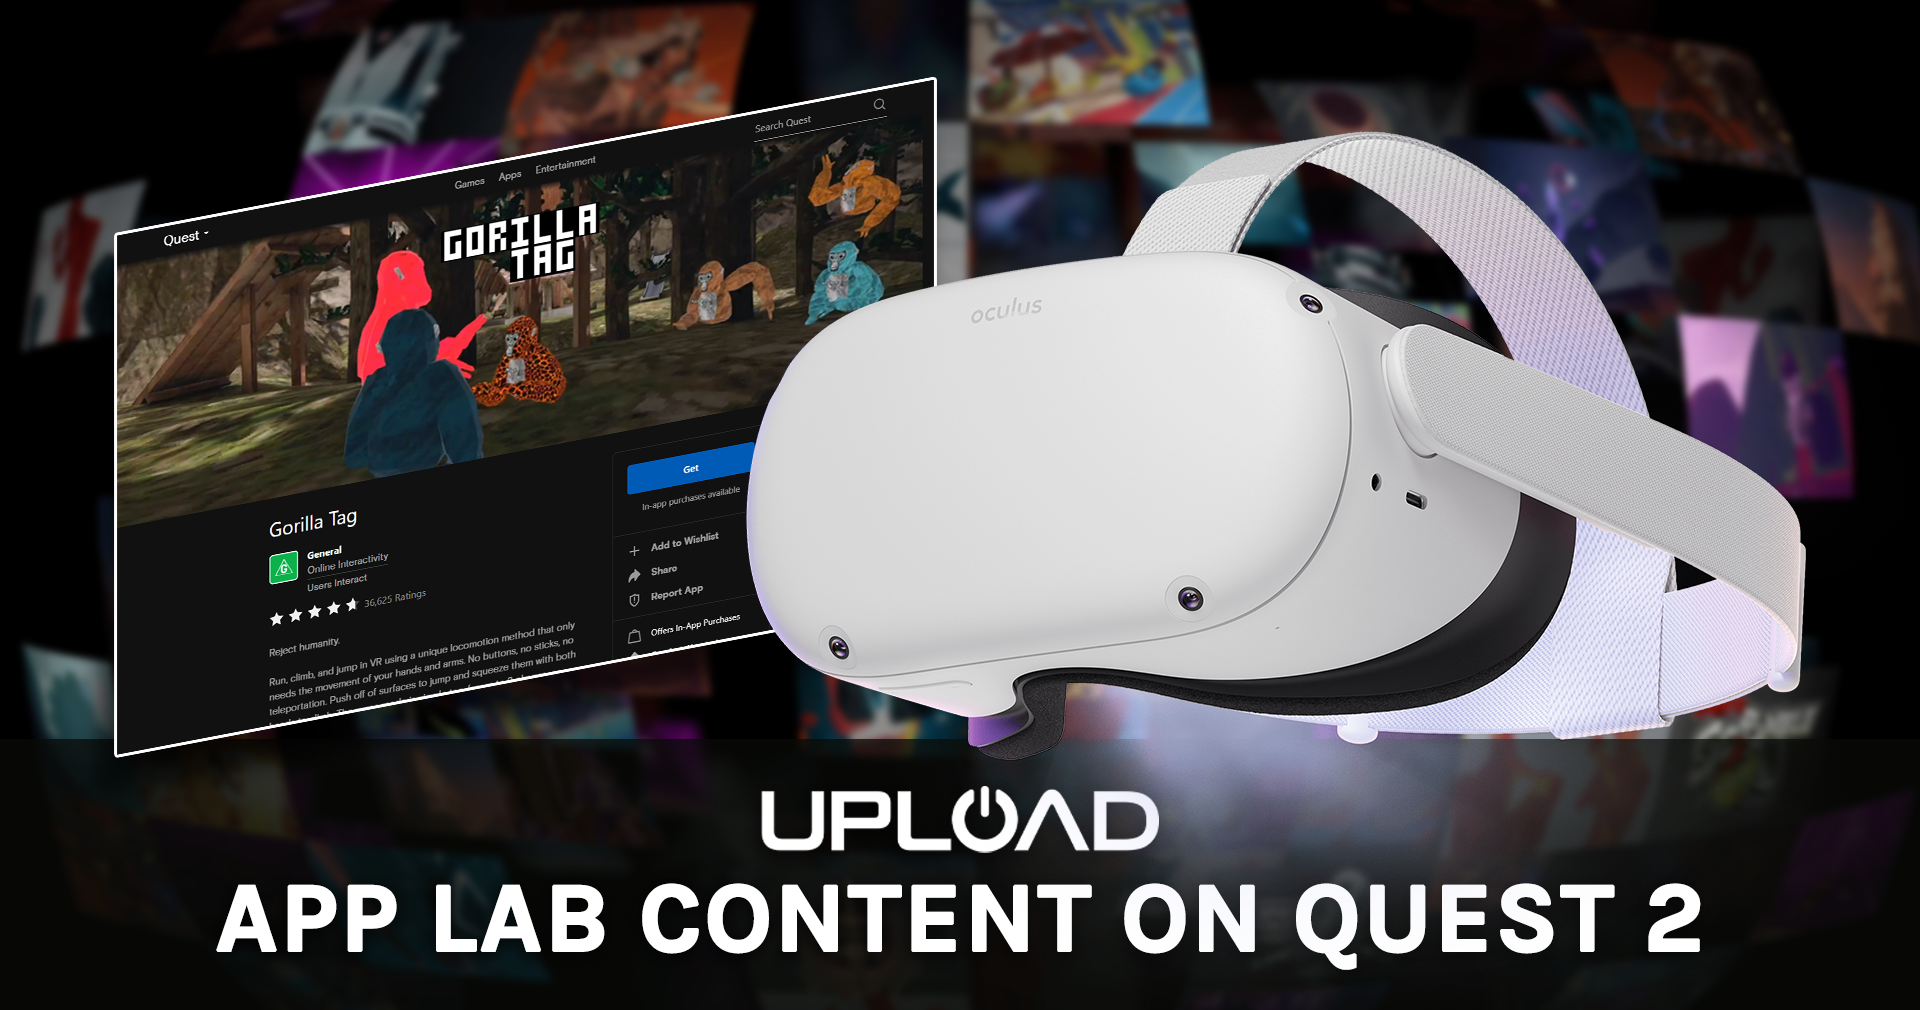 FREE TRIAL and 50% off available on Oculus/AppLab. Get this unique